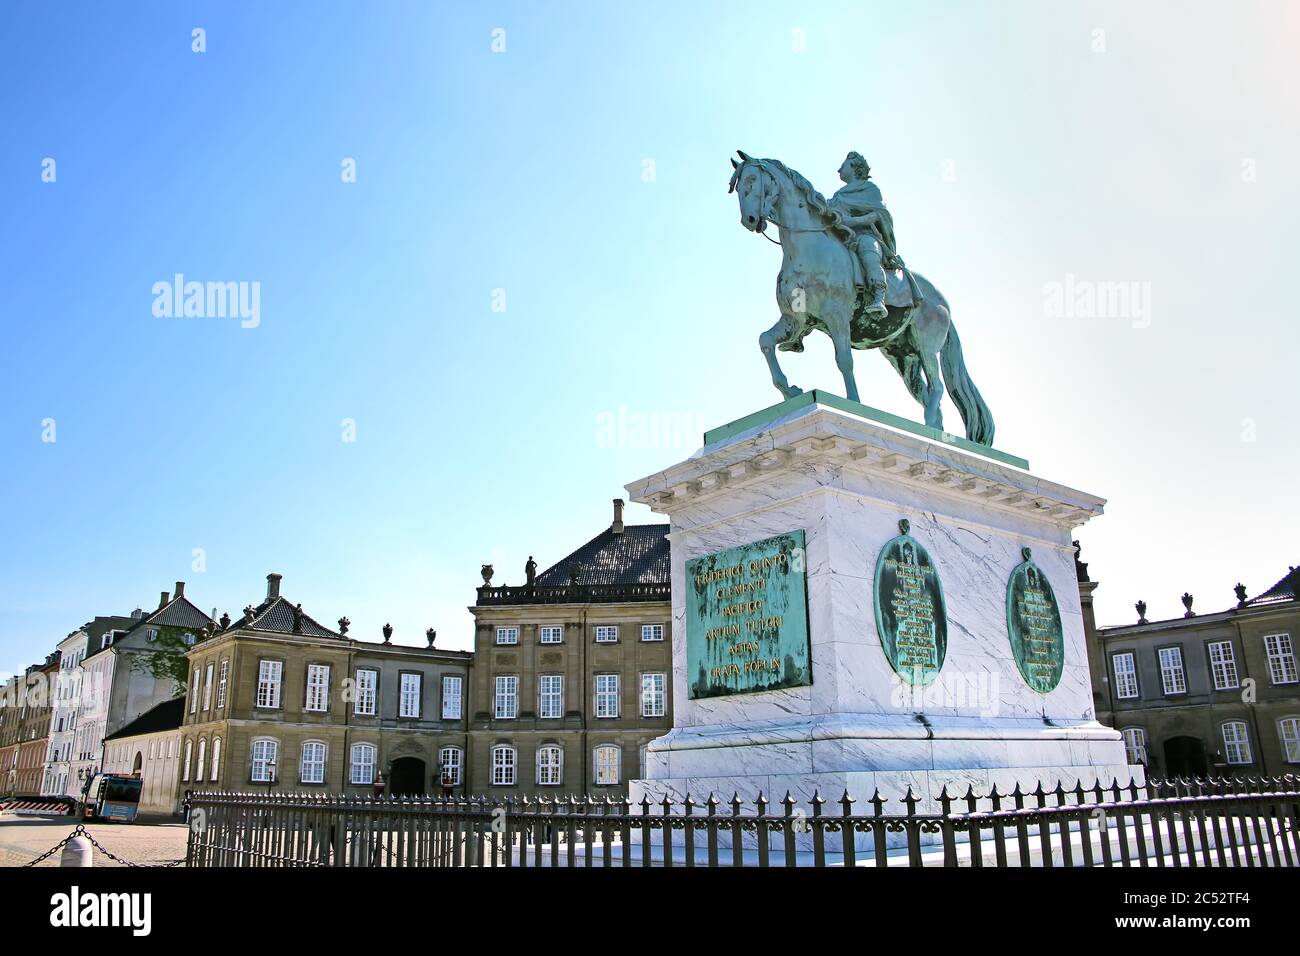 Amalienborg Palace Square with a statue of Frederick V on a horse. It is  the home of the Danish royal family, Copenhagen, Denmark. Stock Photo